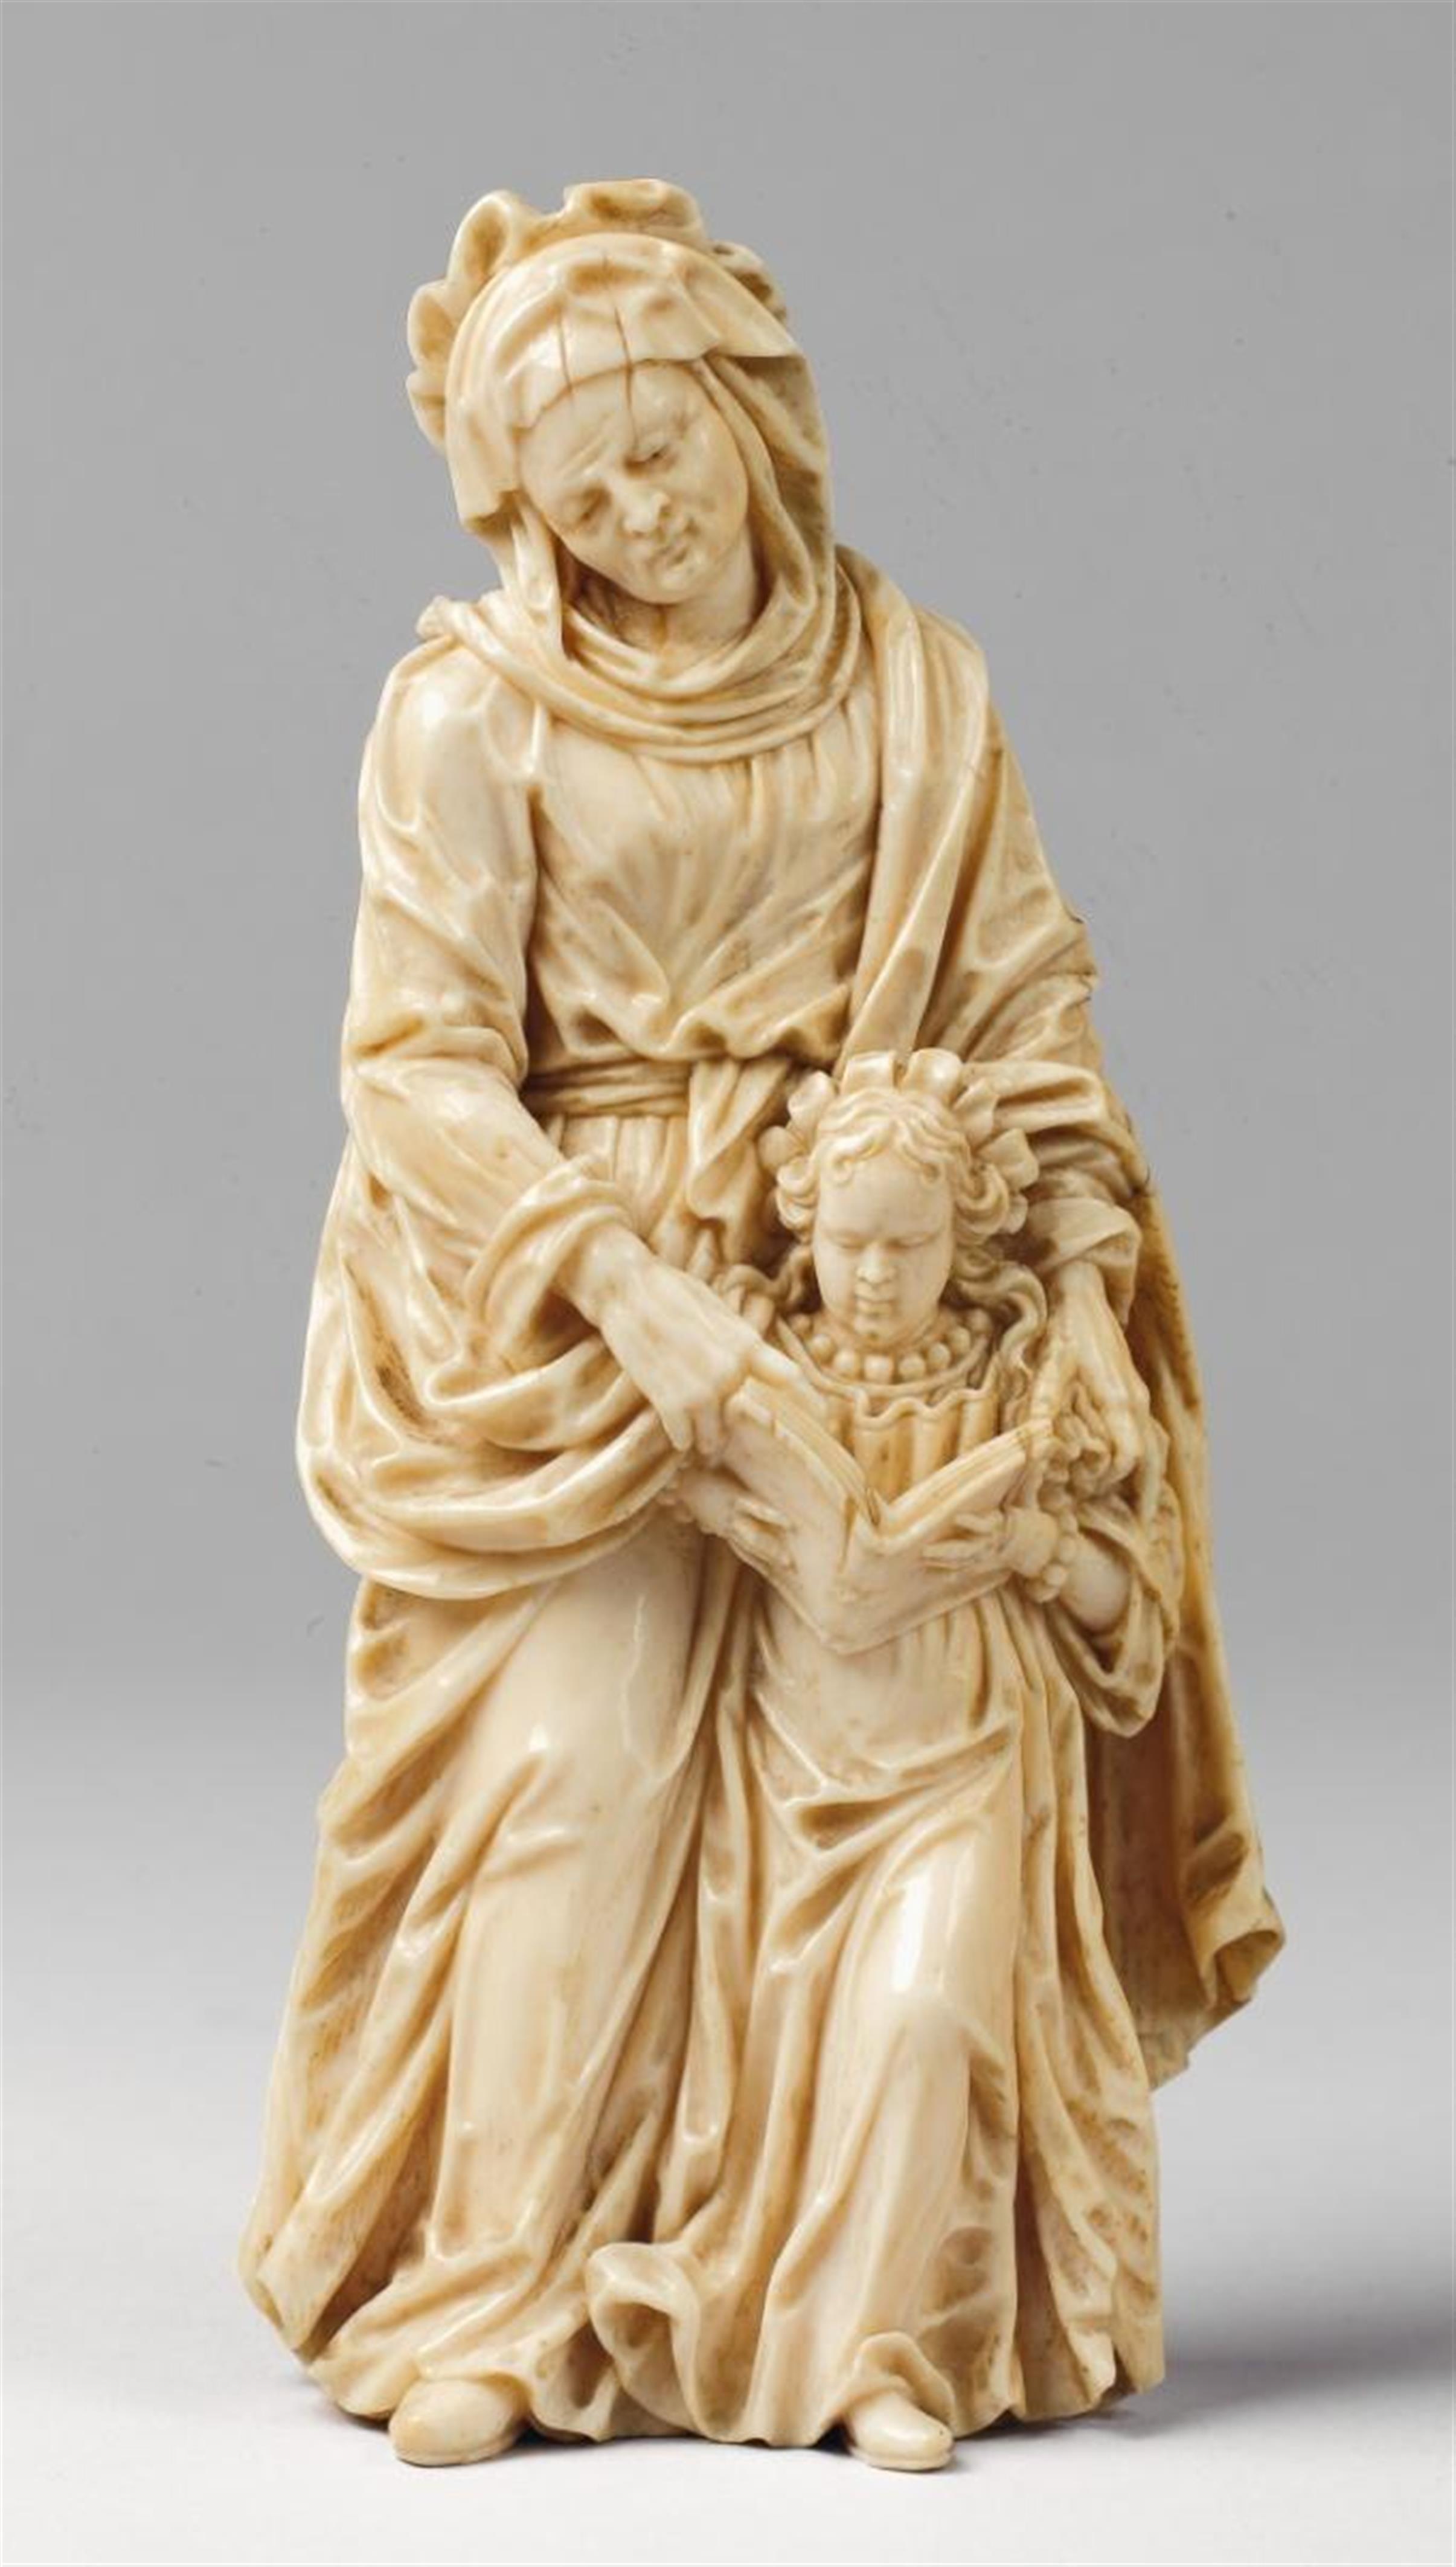 South German, first half 17th Centry - A SOUTH GERMAN IVORY GROUP OF THE EDUCATION OF THE VIRGIN, FIRST HALF 17TH CENTURY - image-1